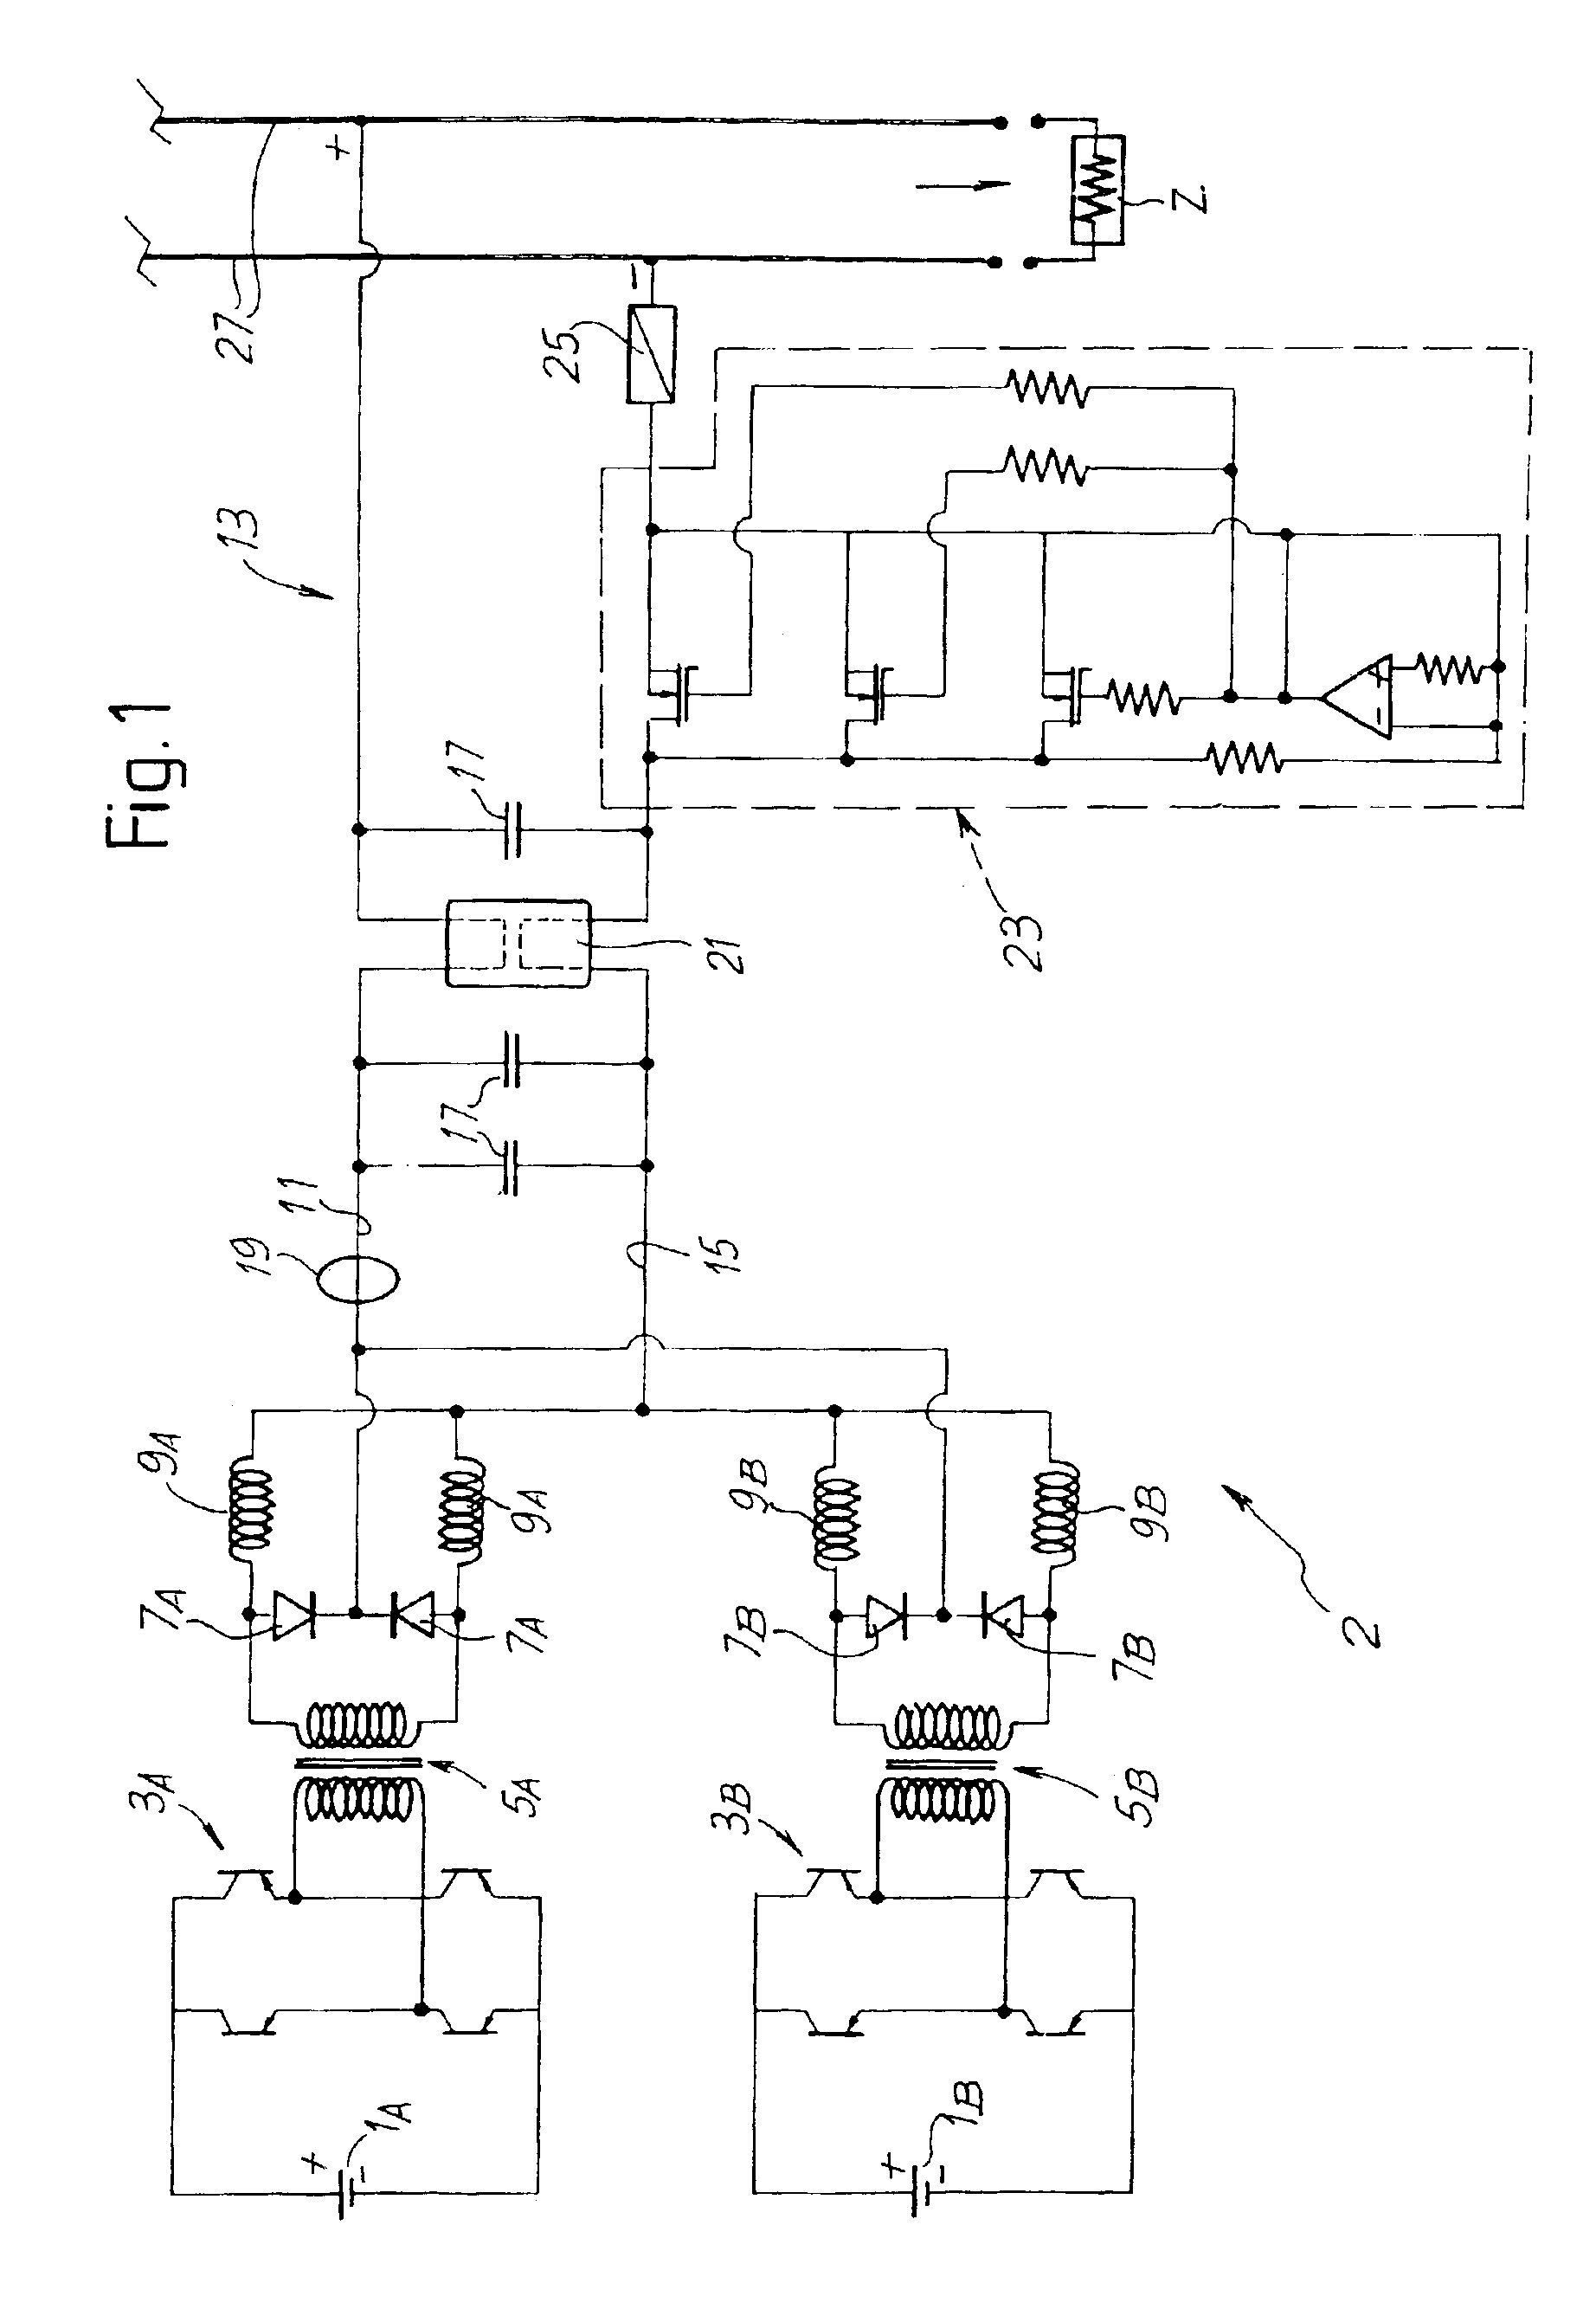 Electric-power supply with rectifier